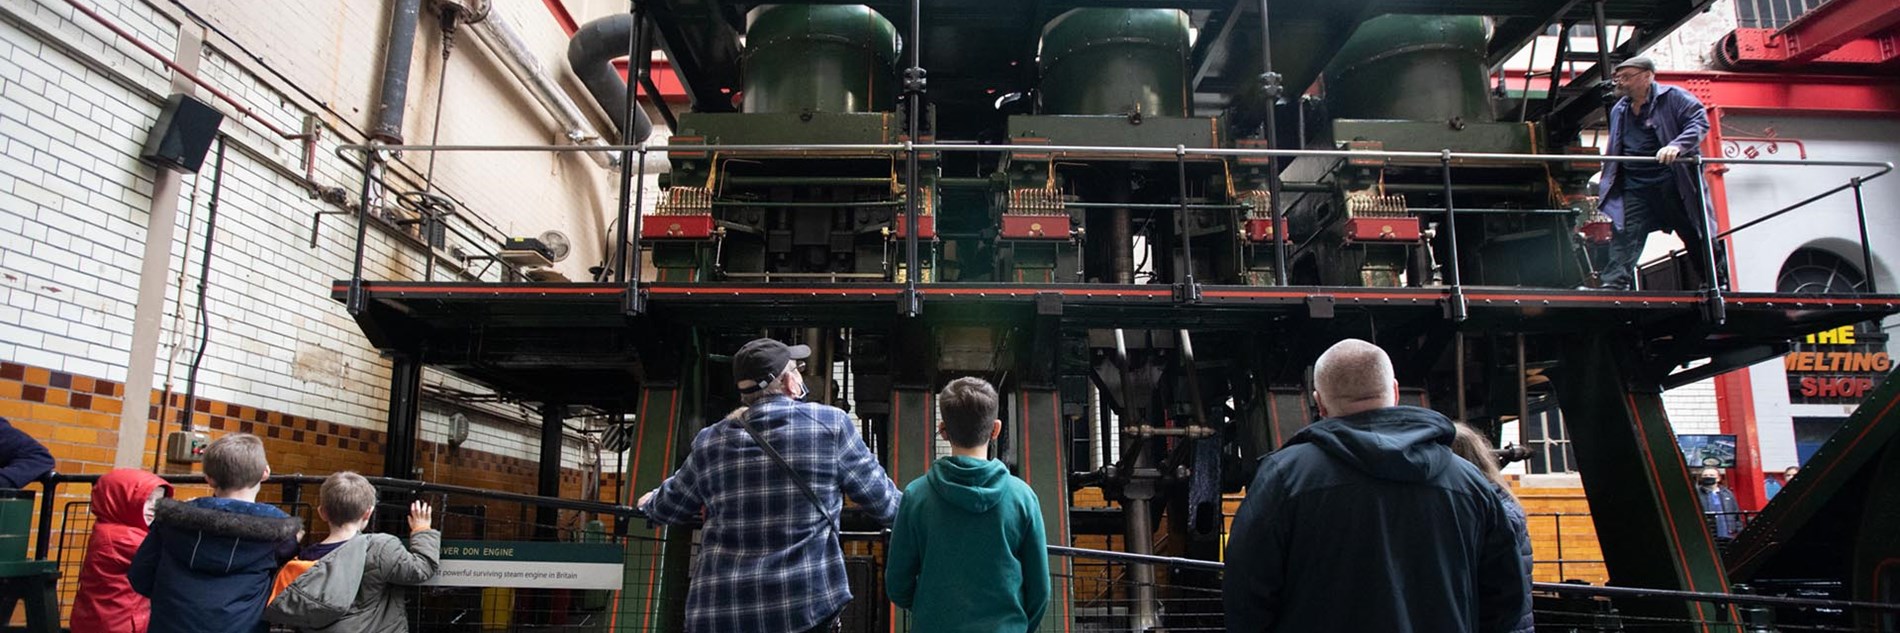 A small group of adults and children viewed from behind, looking up at the River Don Steam Engine.